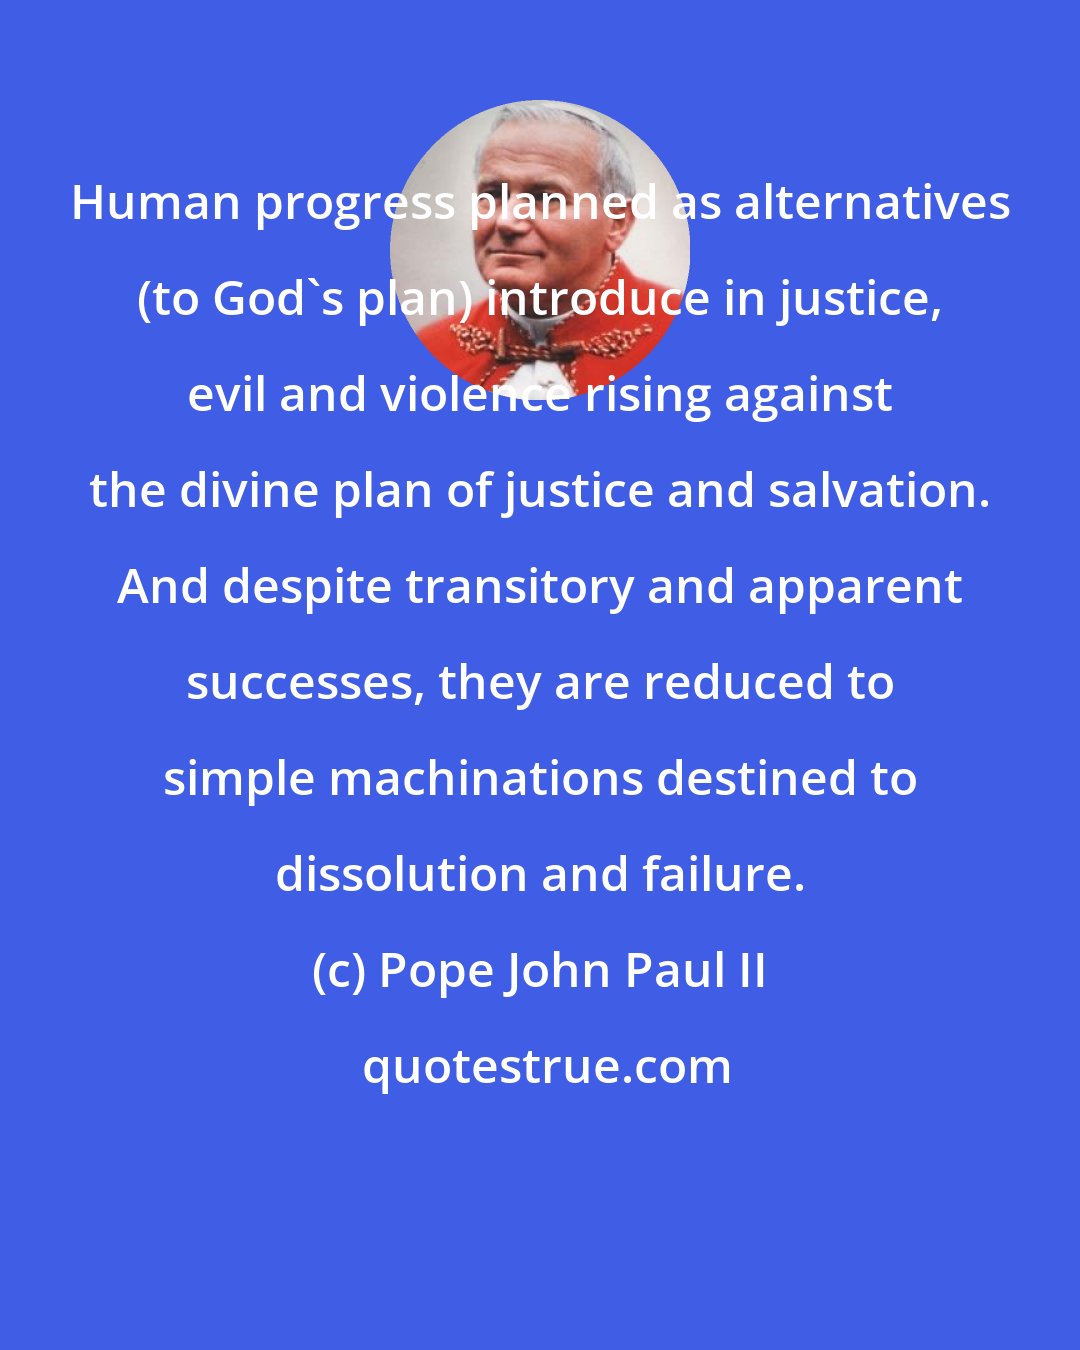 Pope John Paul II: Human progress planned as alternatives (to God's plan) introduce in justice, evil and violence rising against the divine plan of justice and salvation. And despite transitory and apparent successes, they are reduced to simple machinations destined to dissolution and failure.